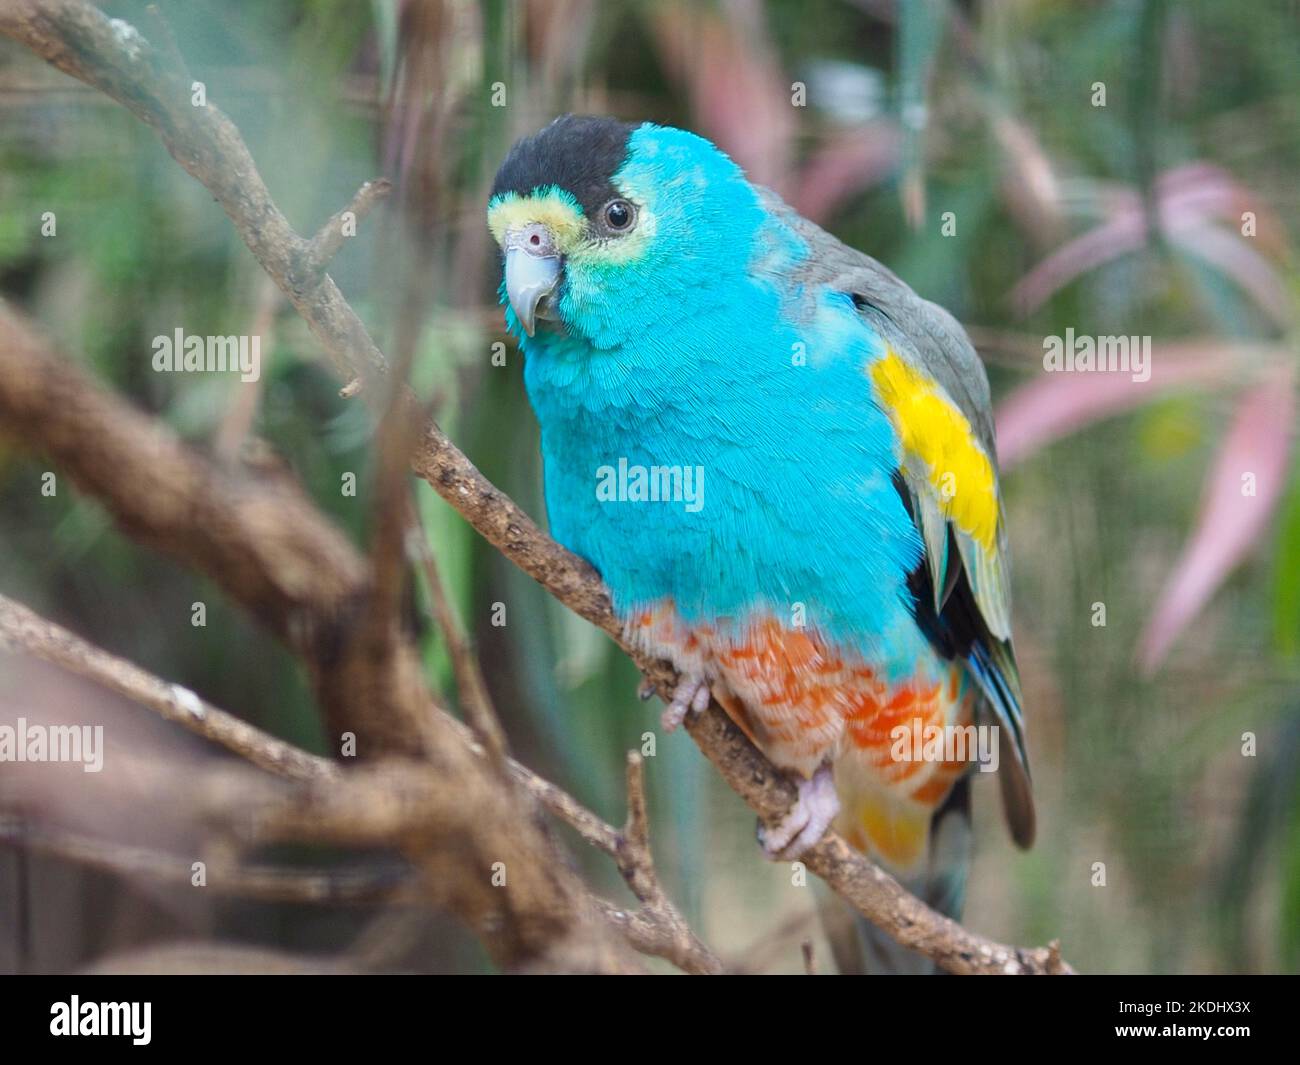 Delightful engaging male Golden-shouldered Parrot with bright eyes and spectacular plumage. Stock Photo